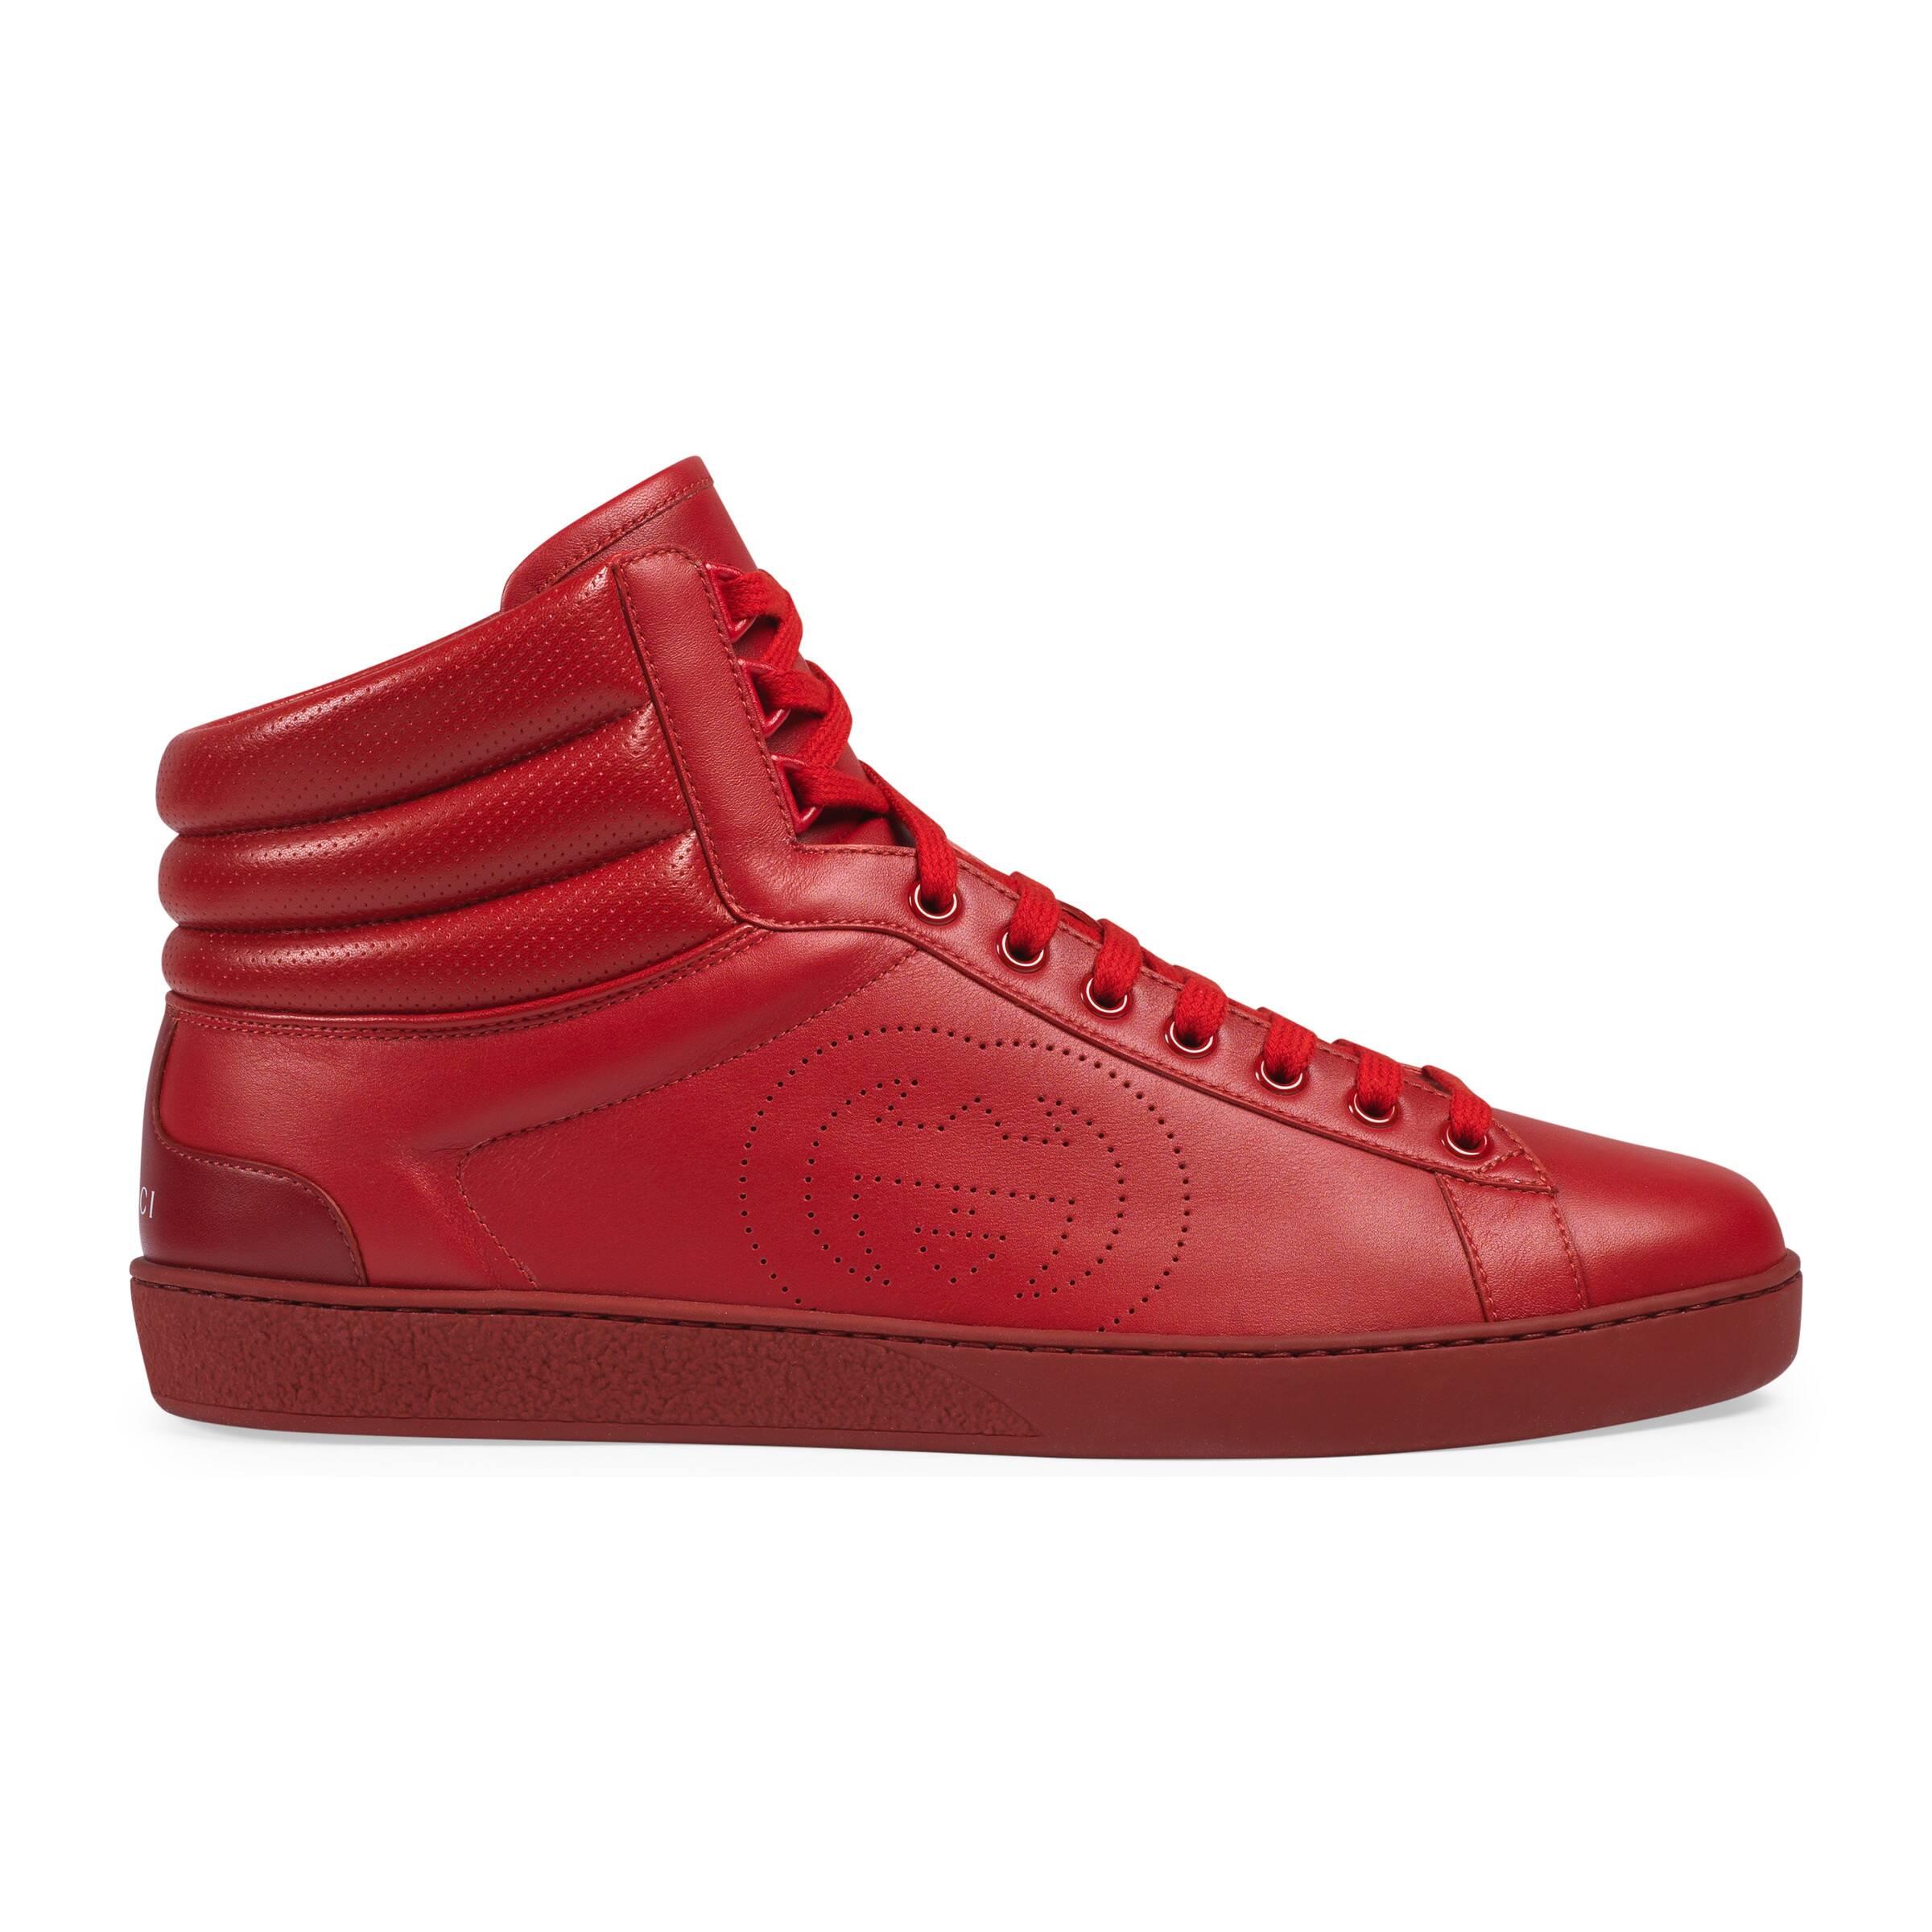 Gucci Leather High-top Ace Sneaker in Red for Men - Lyst